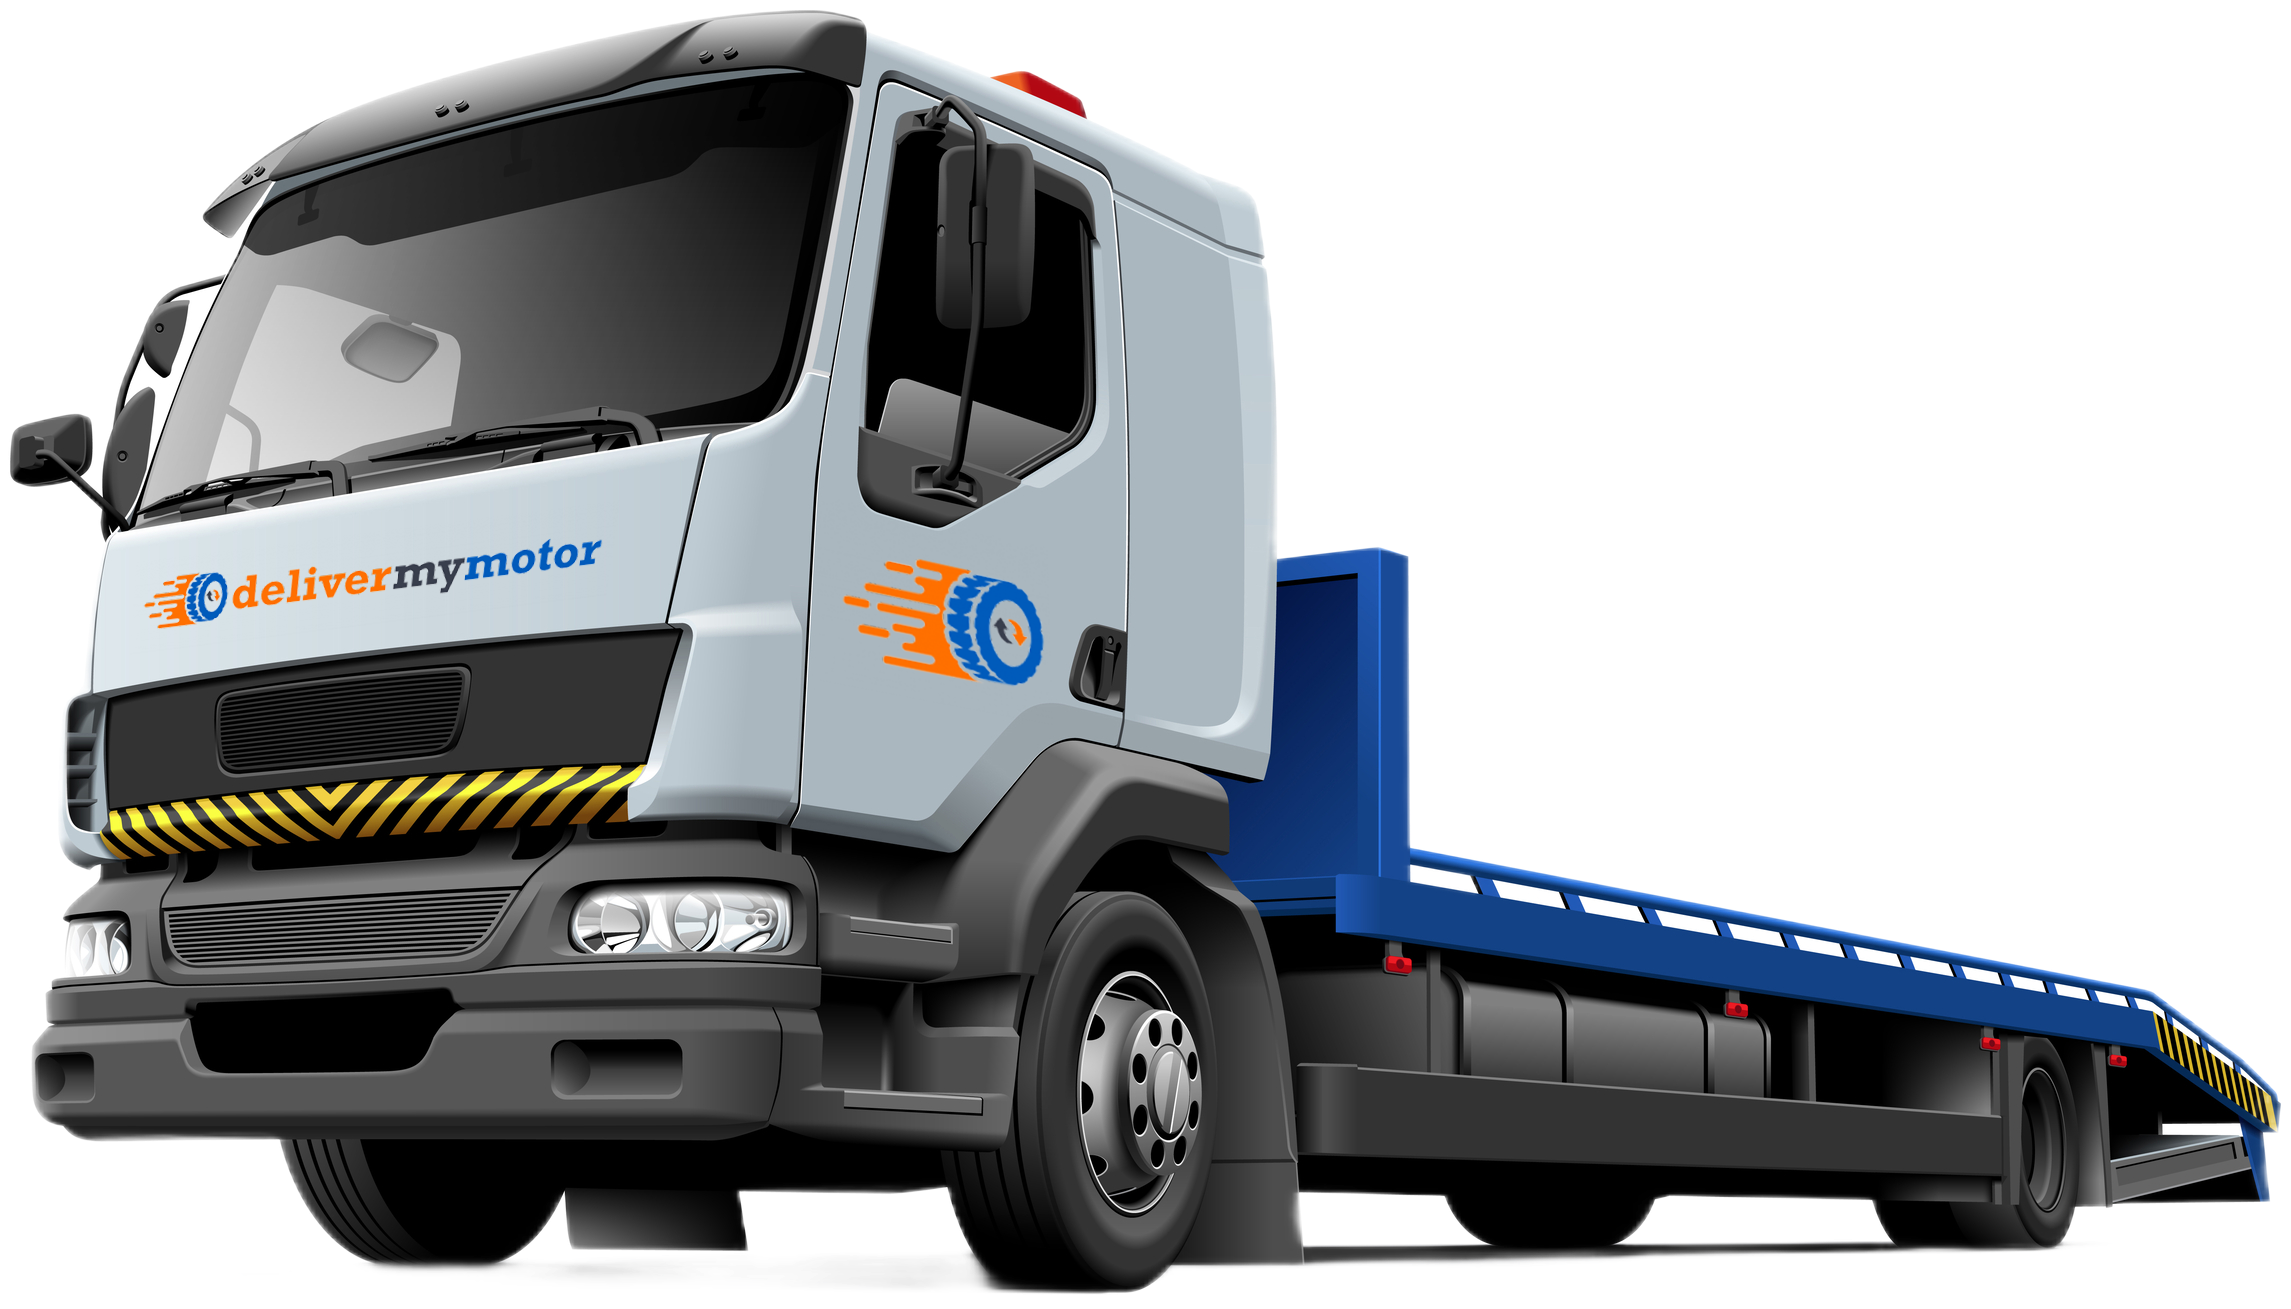 Transport delivermymotor lorry